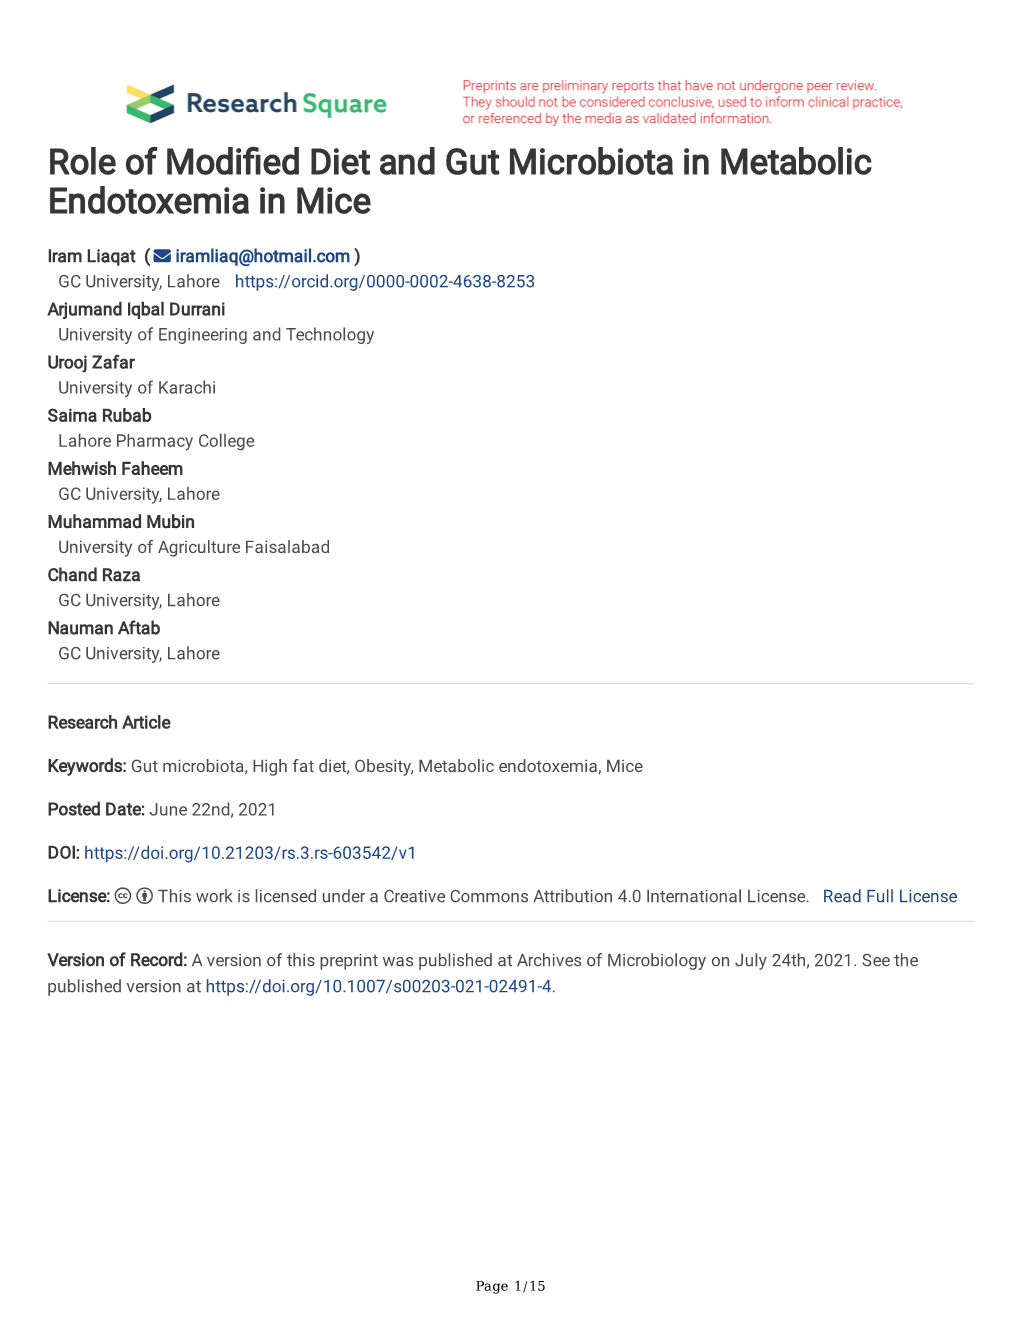 Role of Modi Ed Diet and Gut Microbiota in Metabolic